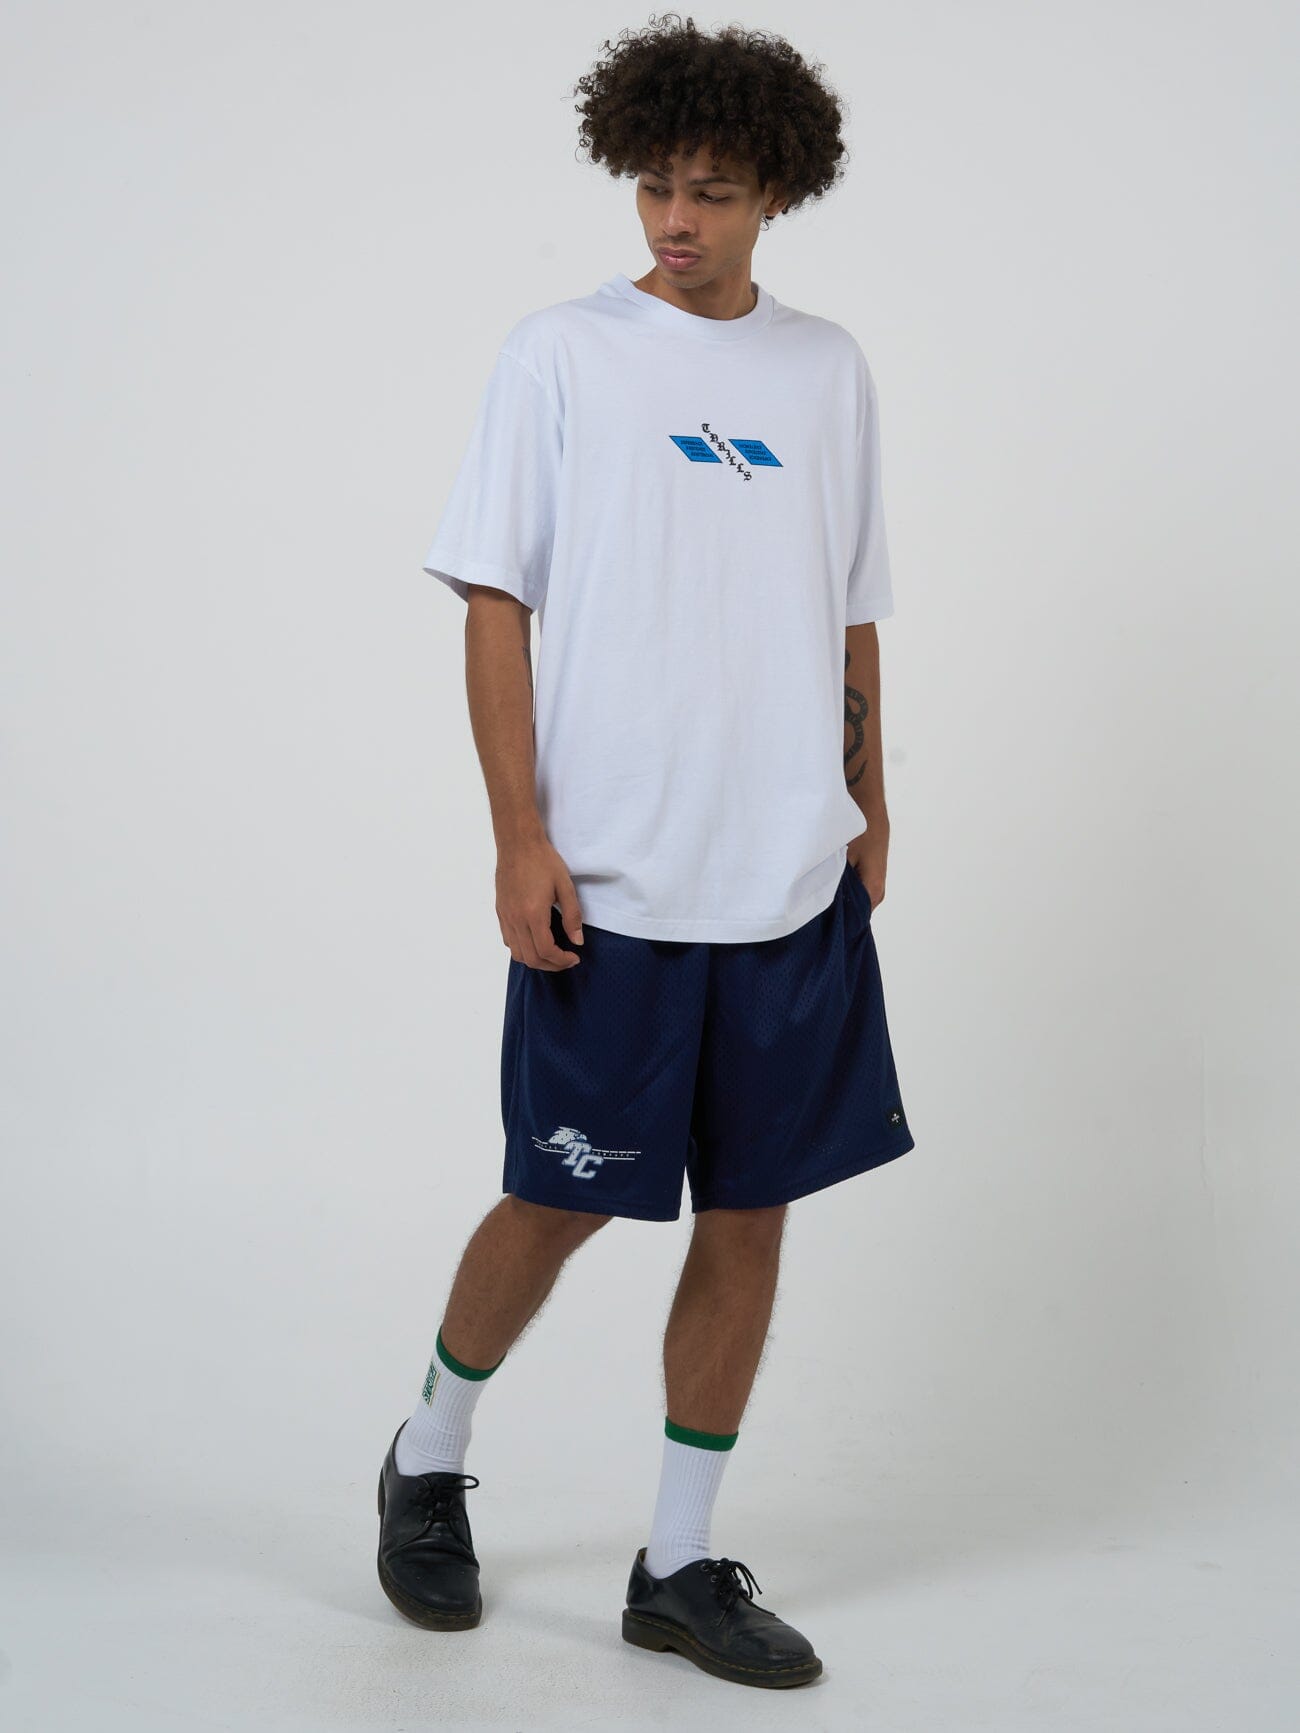 Cultivate Gravitate Oversize Fit Tee - White